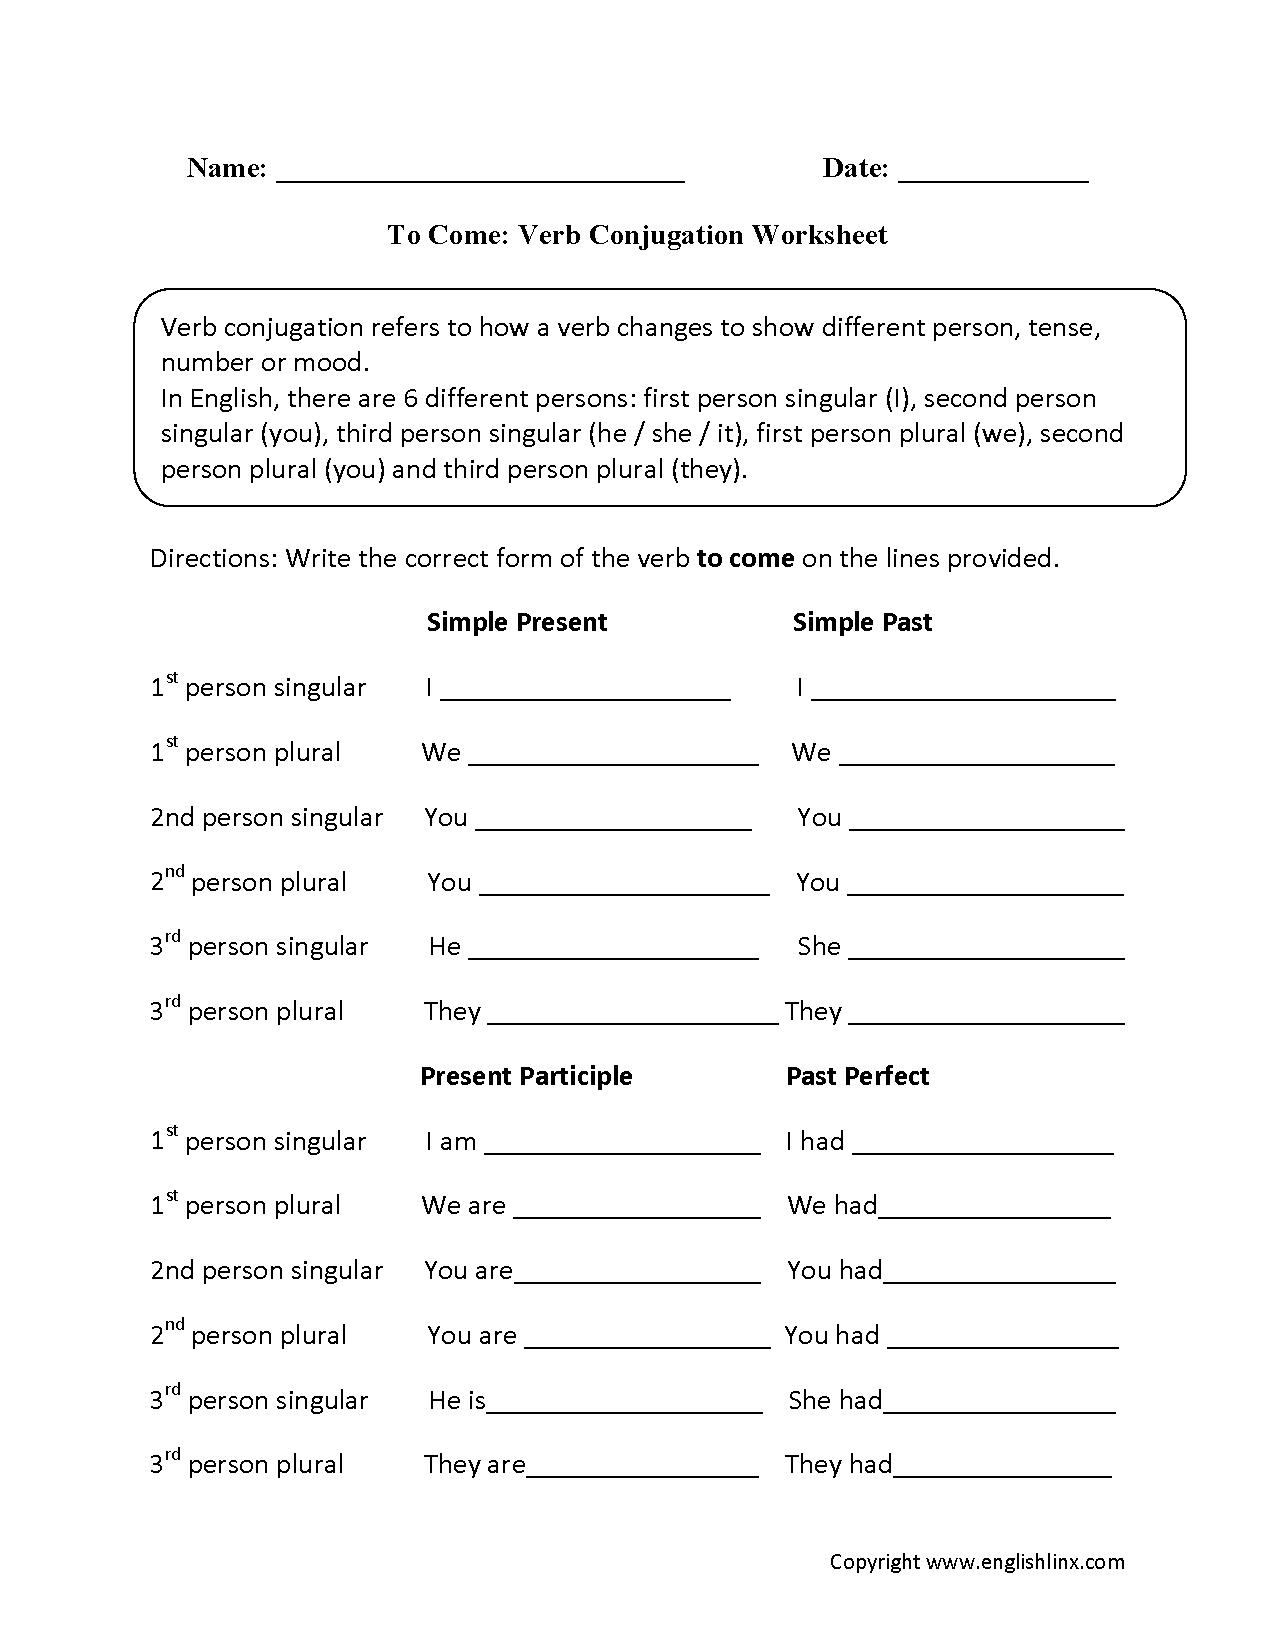 To Come Verb Conjugation Worksheets